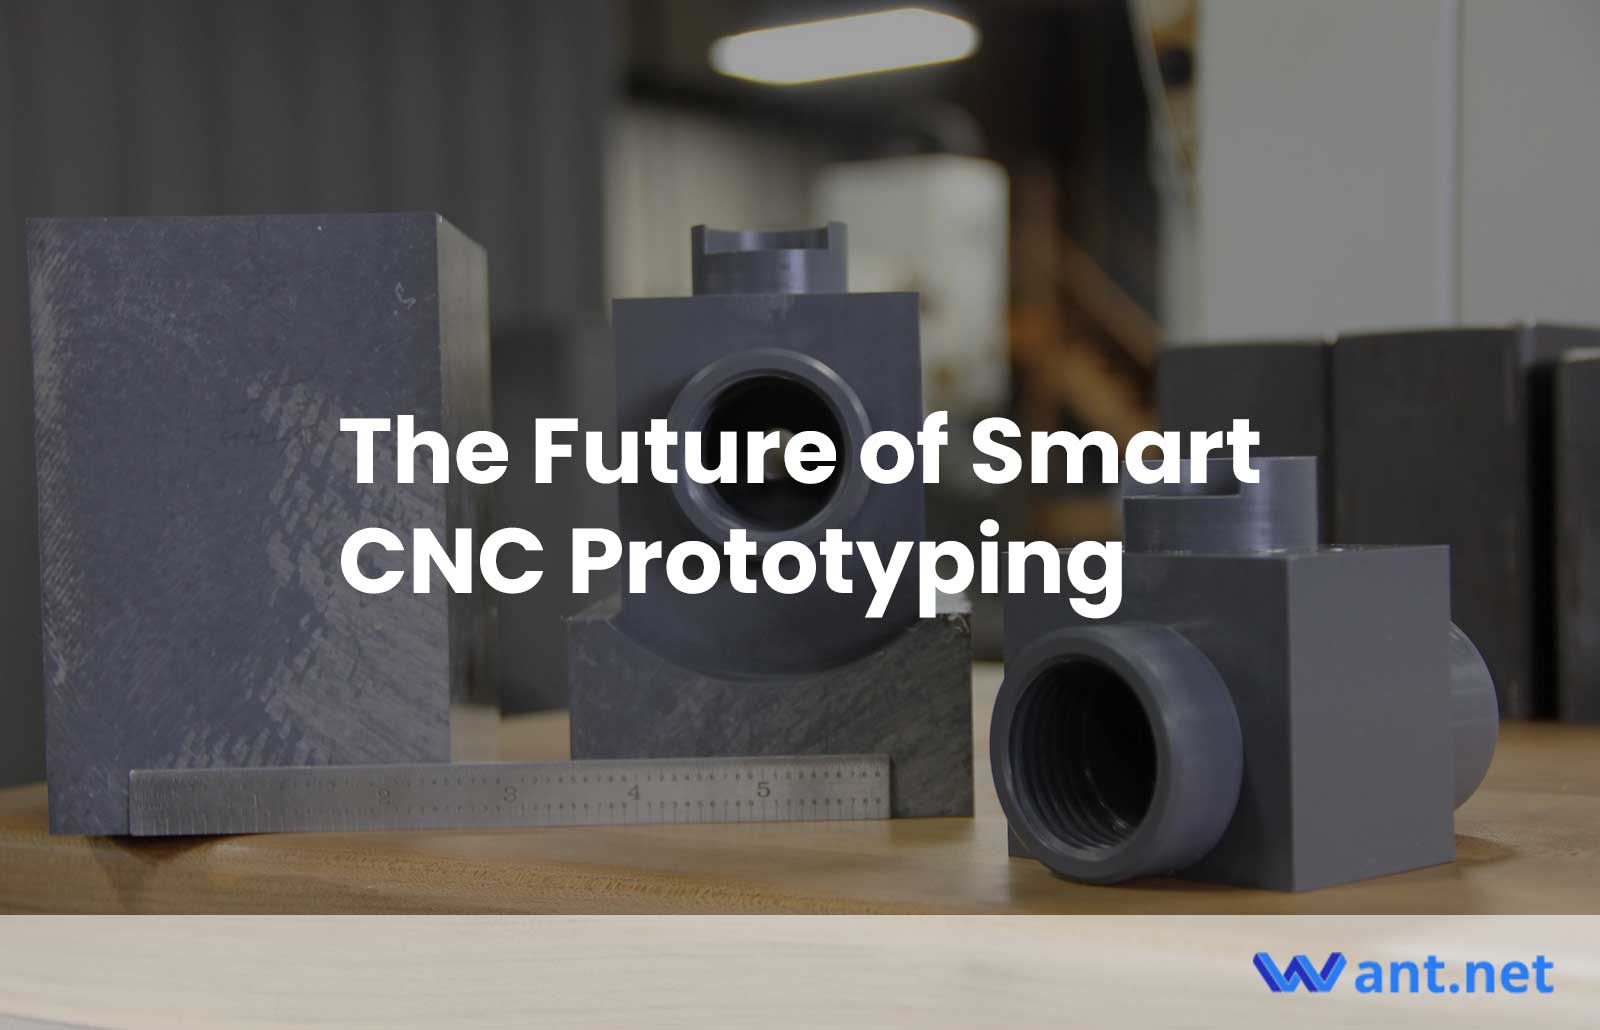 The Future of Smart CNC Prototyping